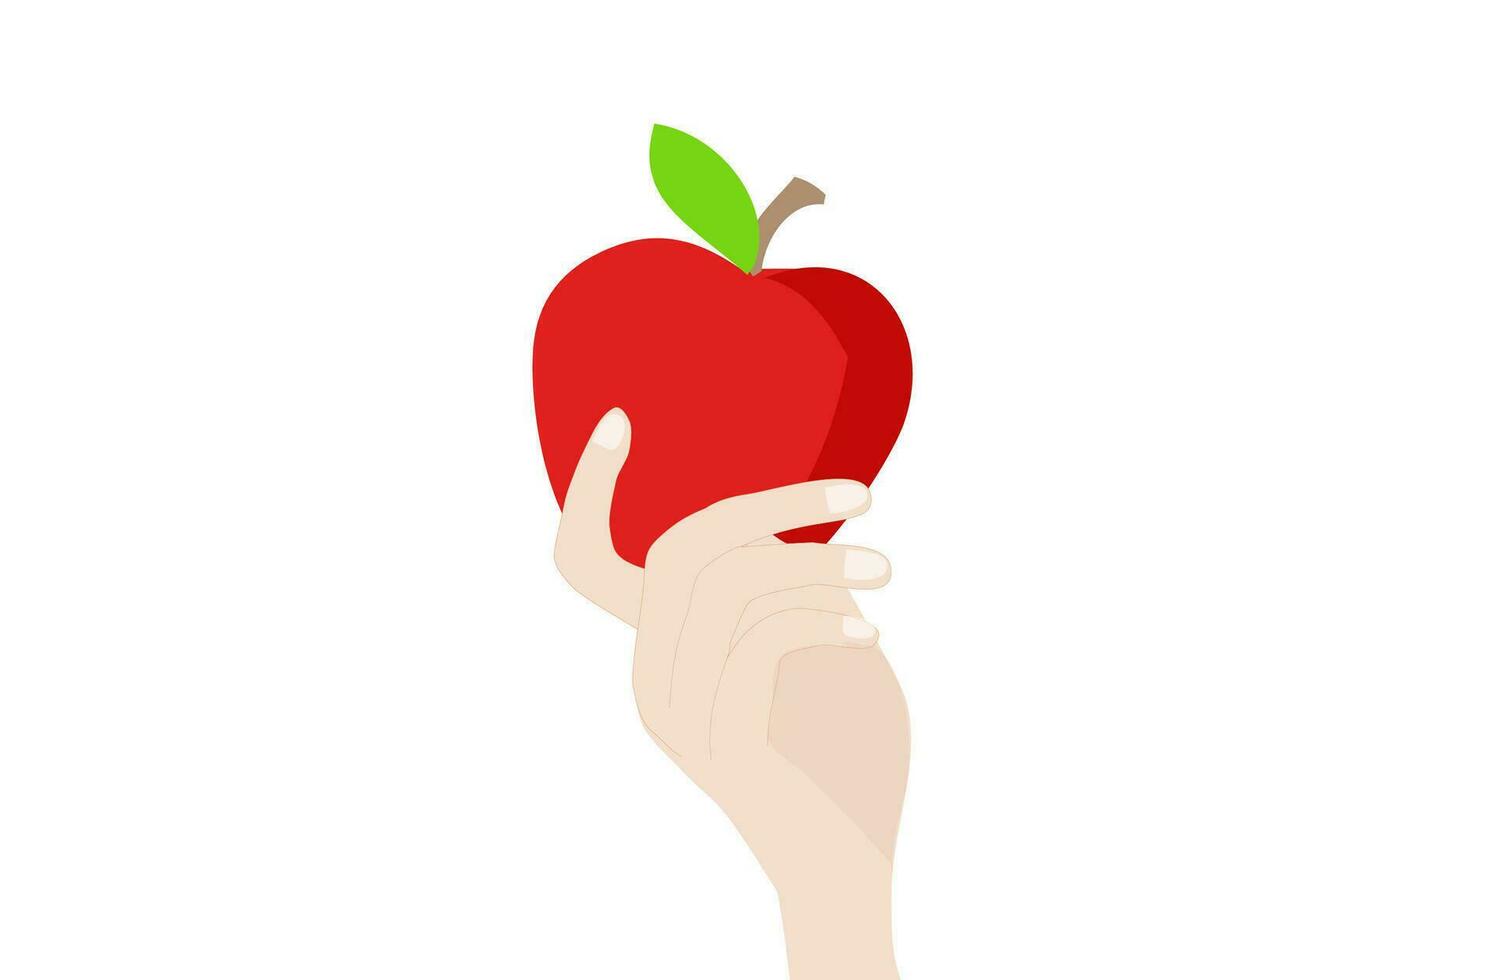 Red apple in woman's hand vector illustration